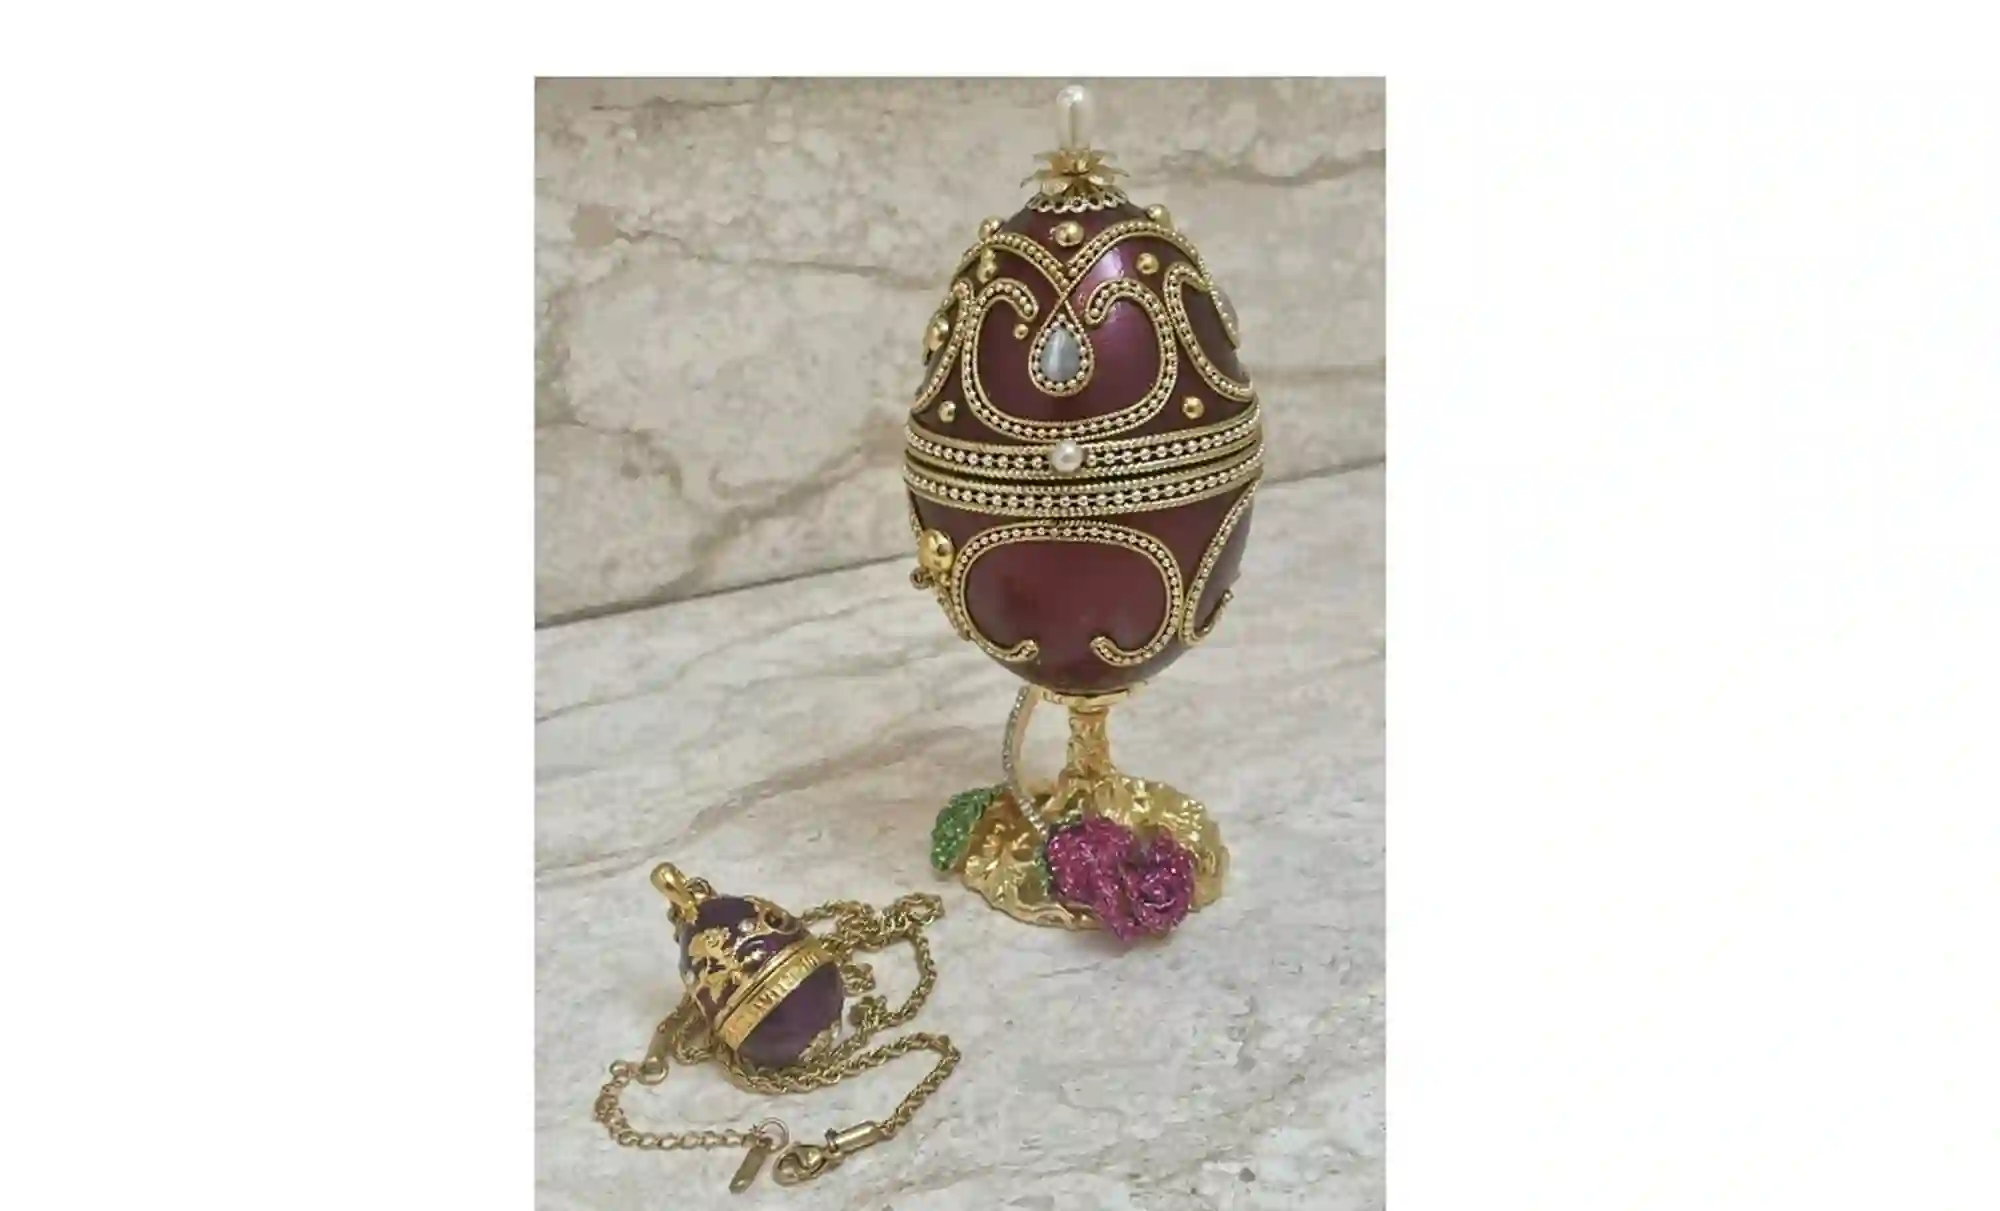 Valentines day Rose ONE OfA KIND Amethyst Rose Faberge Egg Musical + Faberge Egg Diamond Necklace Gold Jewelry Gift for her Birthday Wedding 